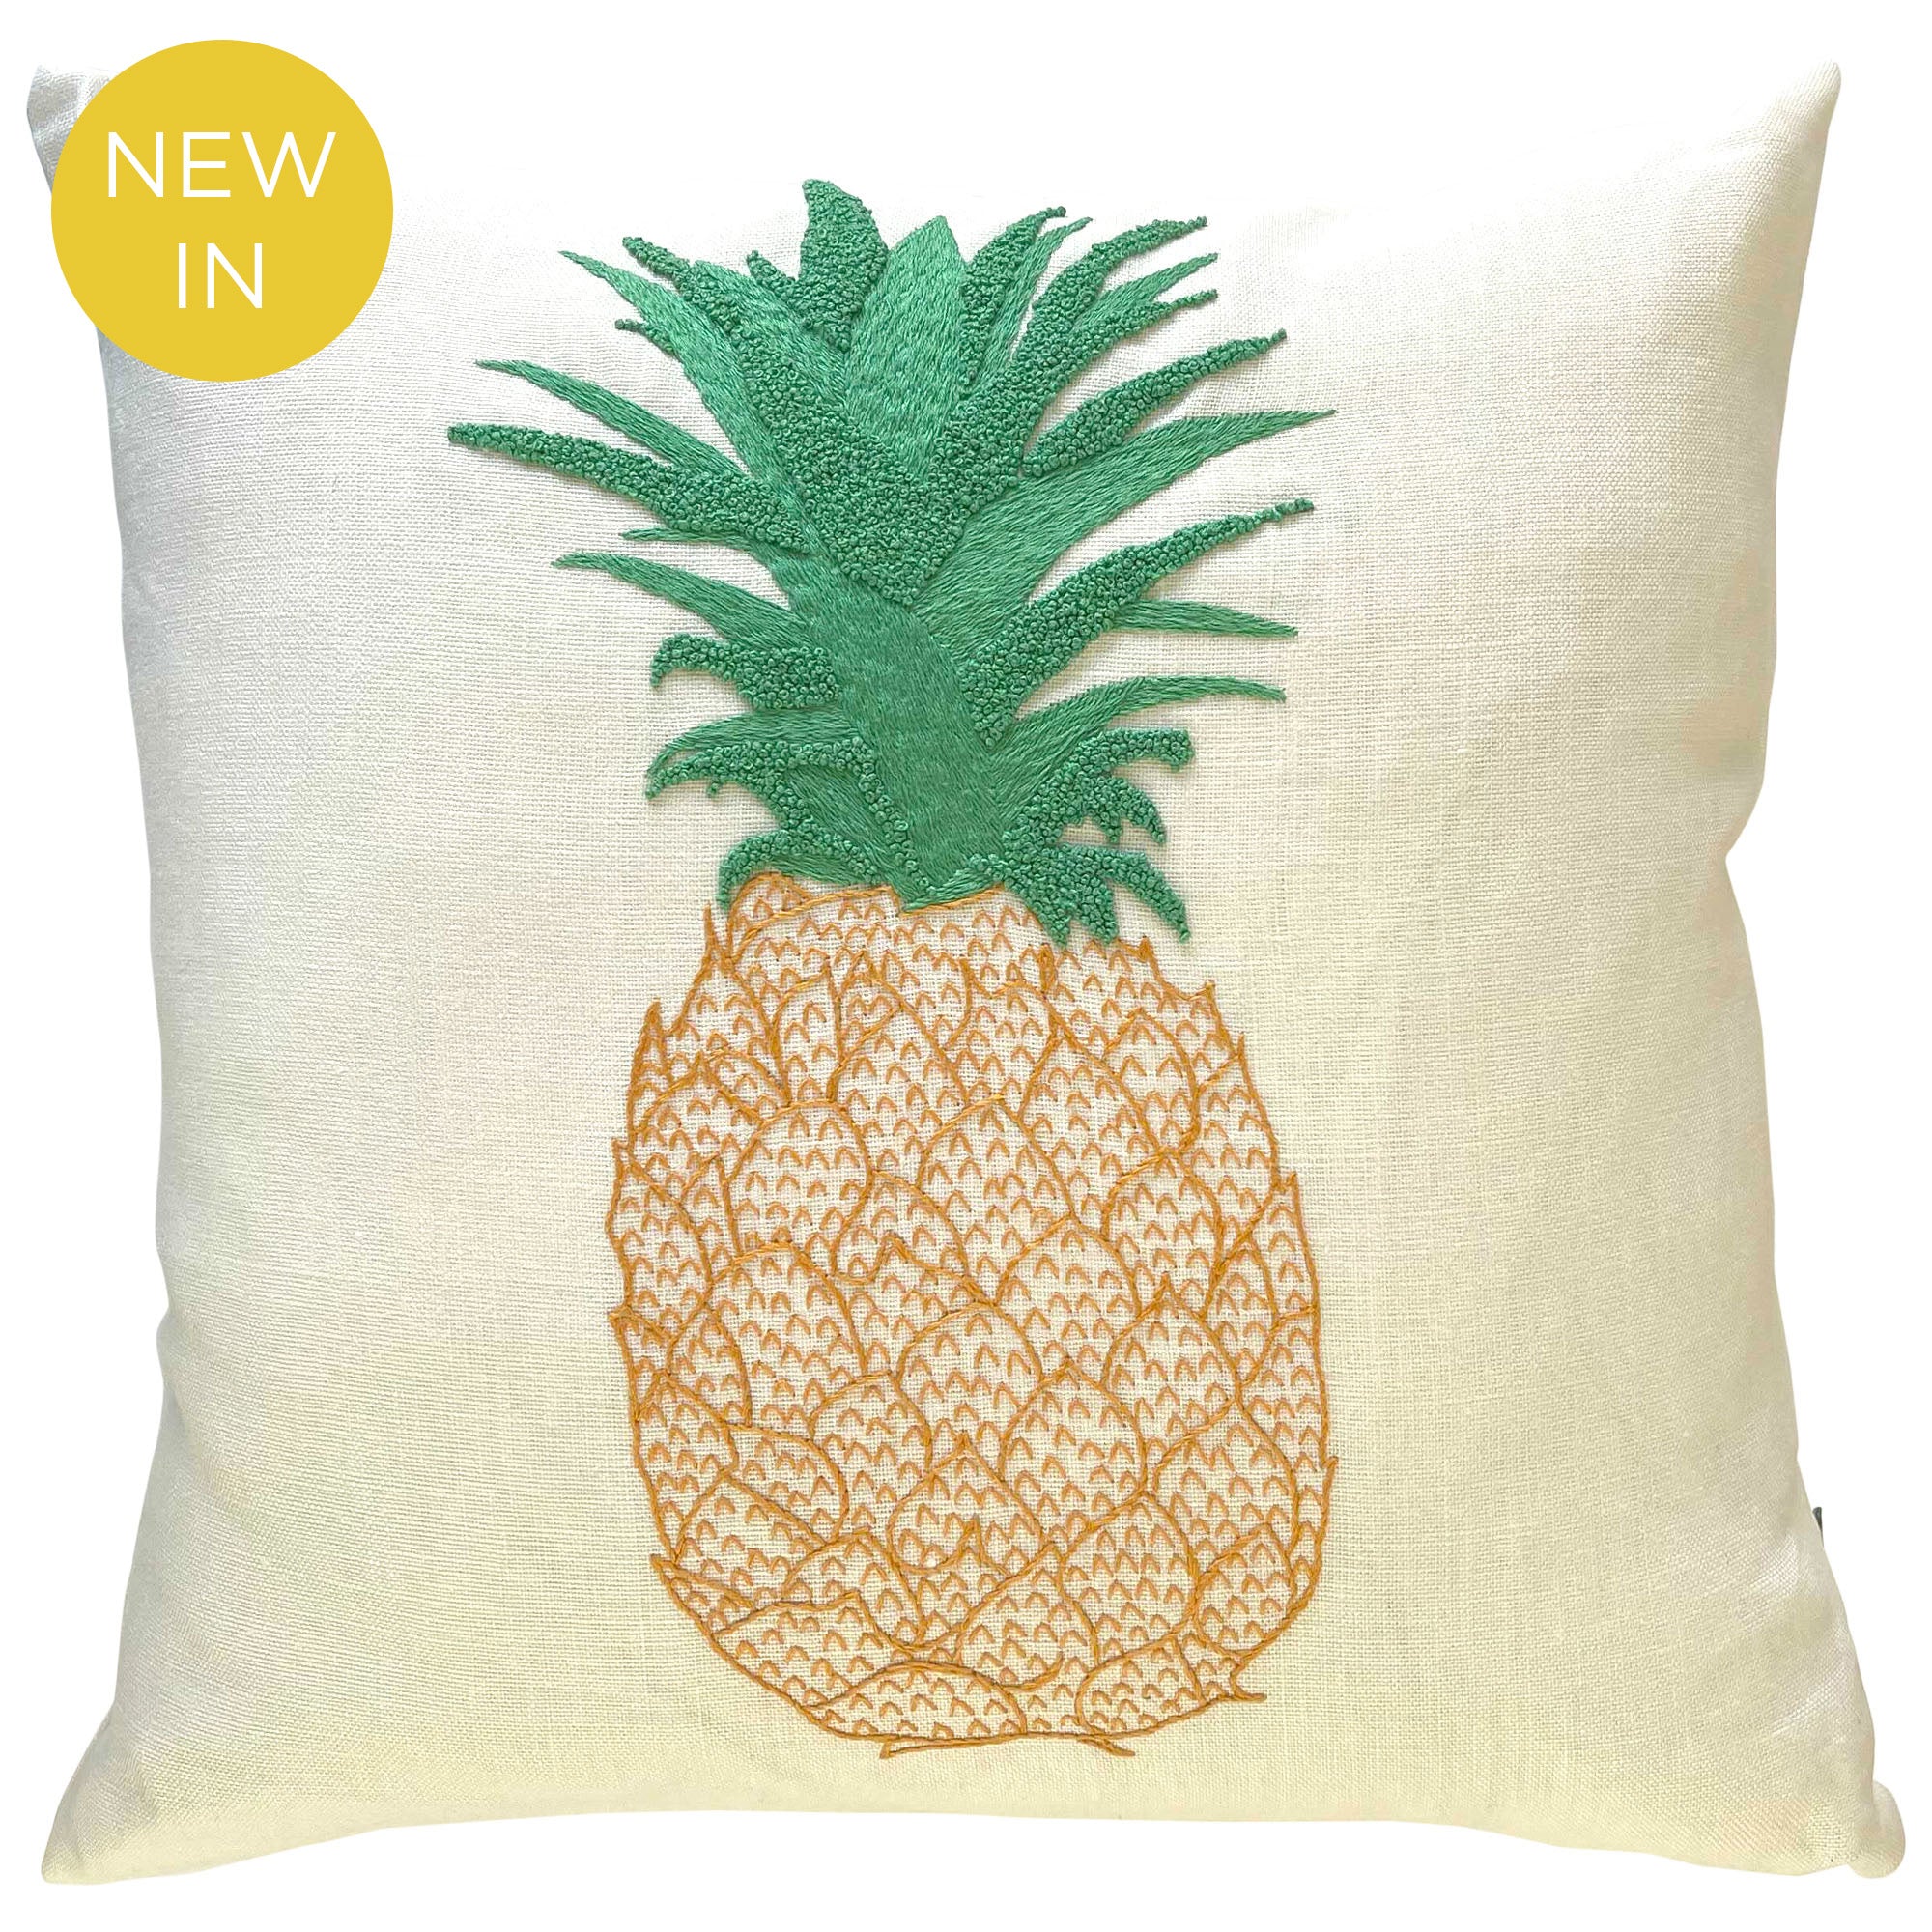 Pineapple Embroidered Cushion Yellow and Green on Cream